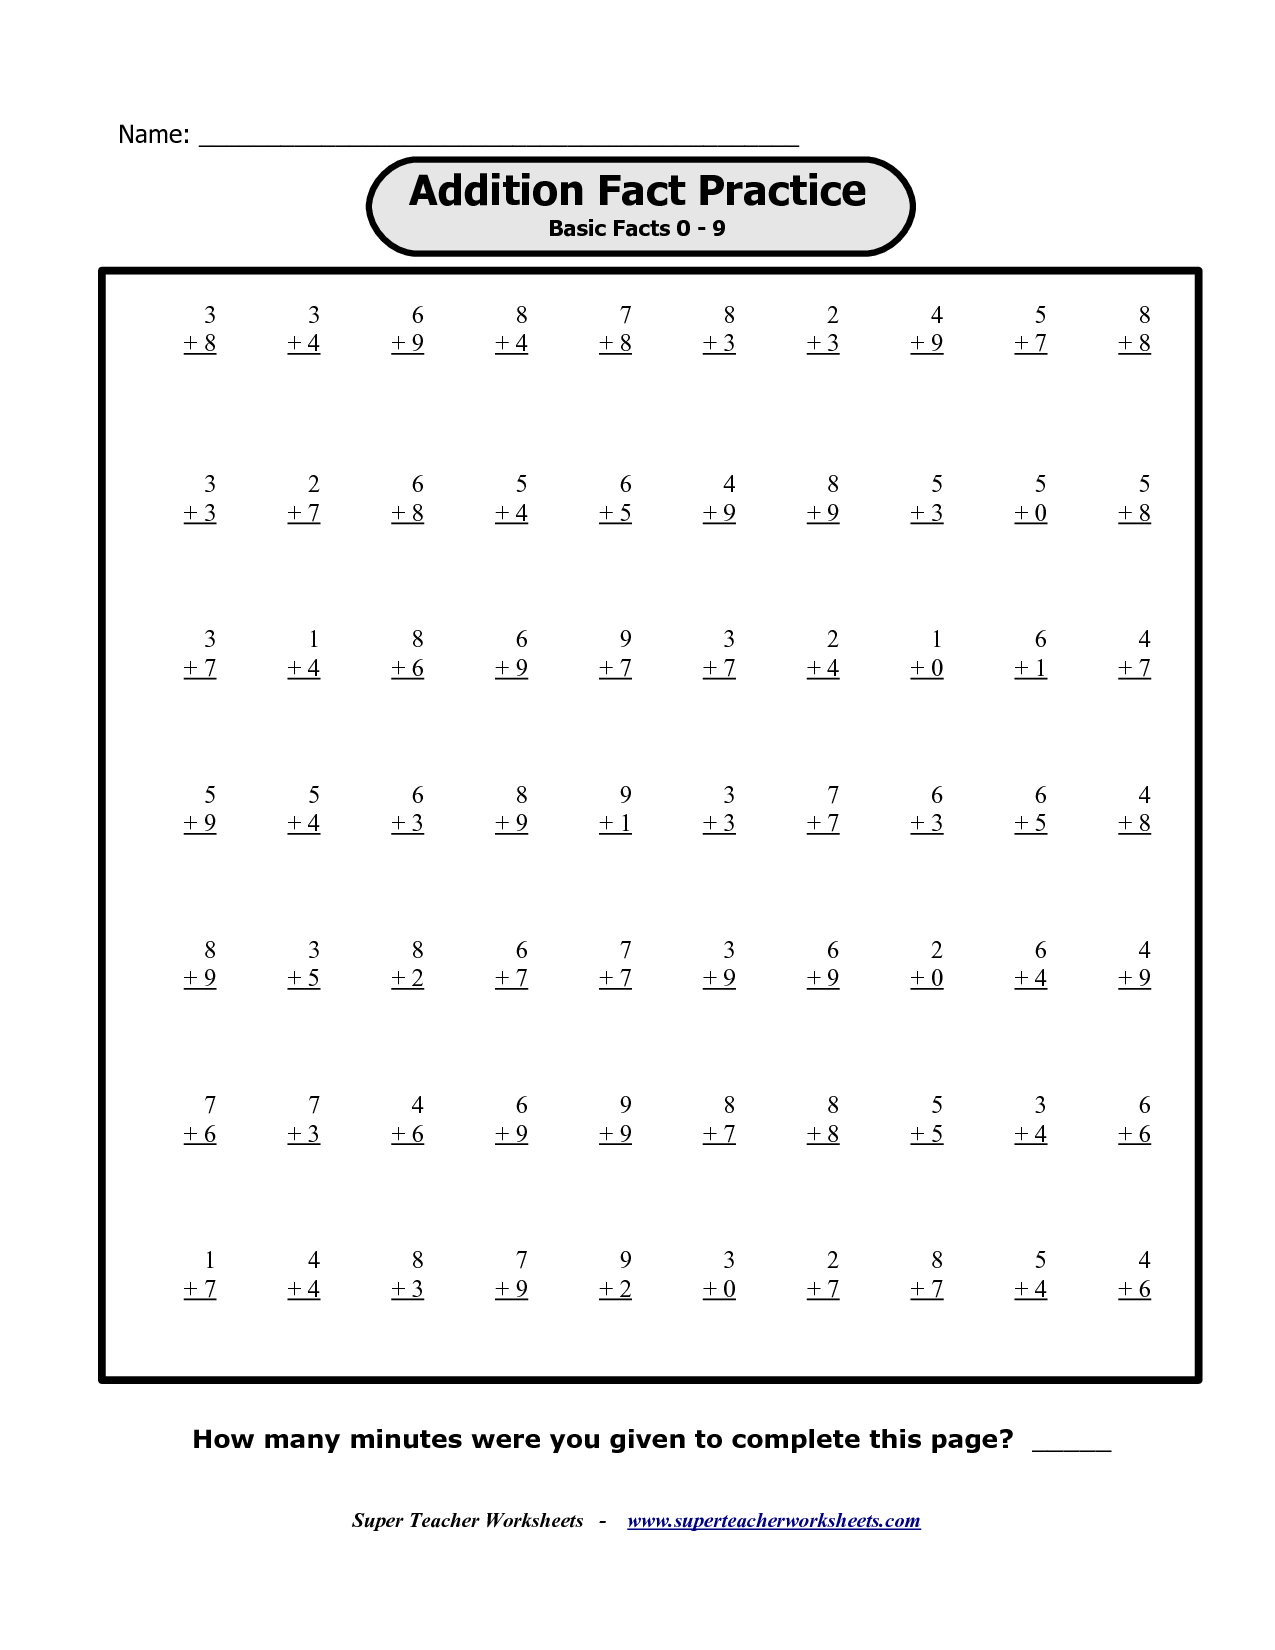 Addition Math Facts Worksheets Printable